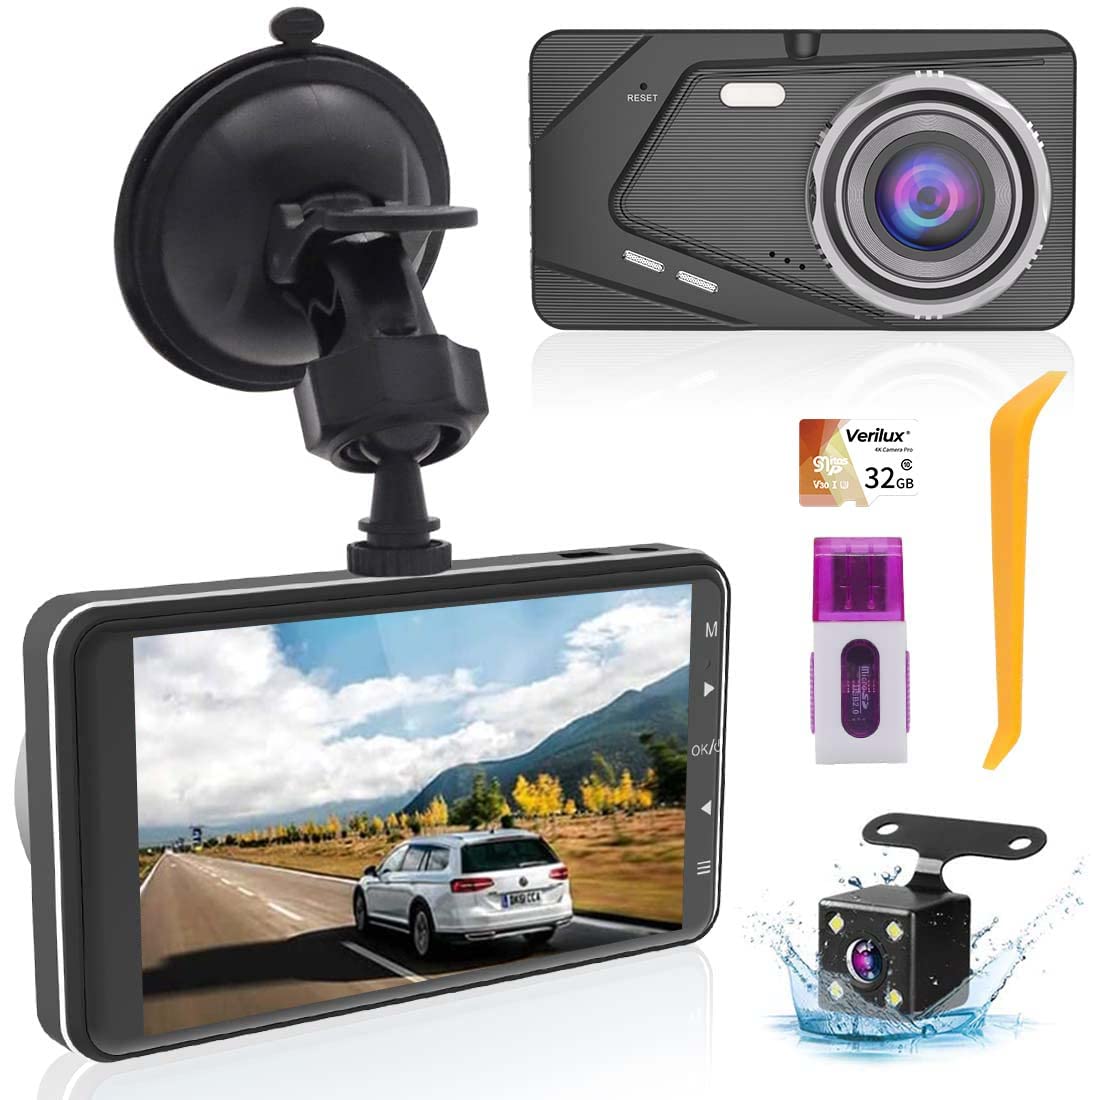 How To Install A Dashboard Camera: Are You Ready to Enhance Your Road Safety?